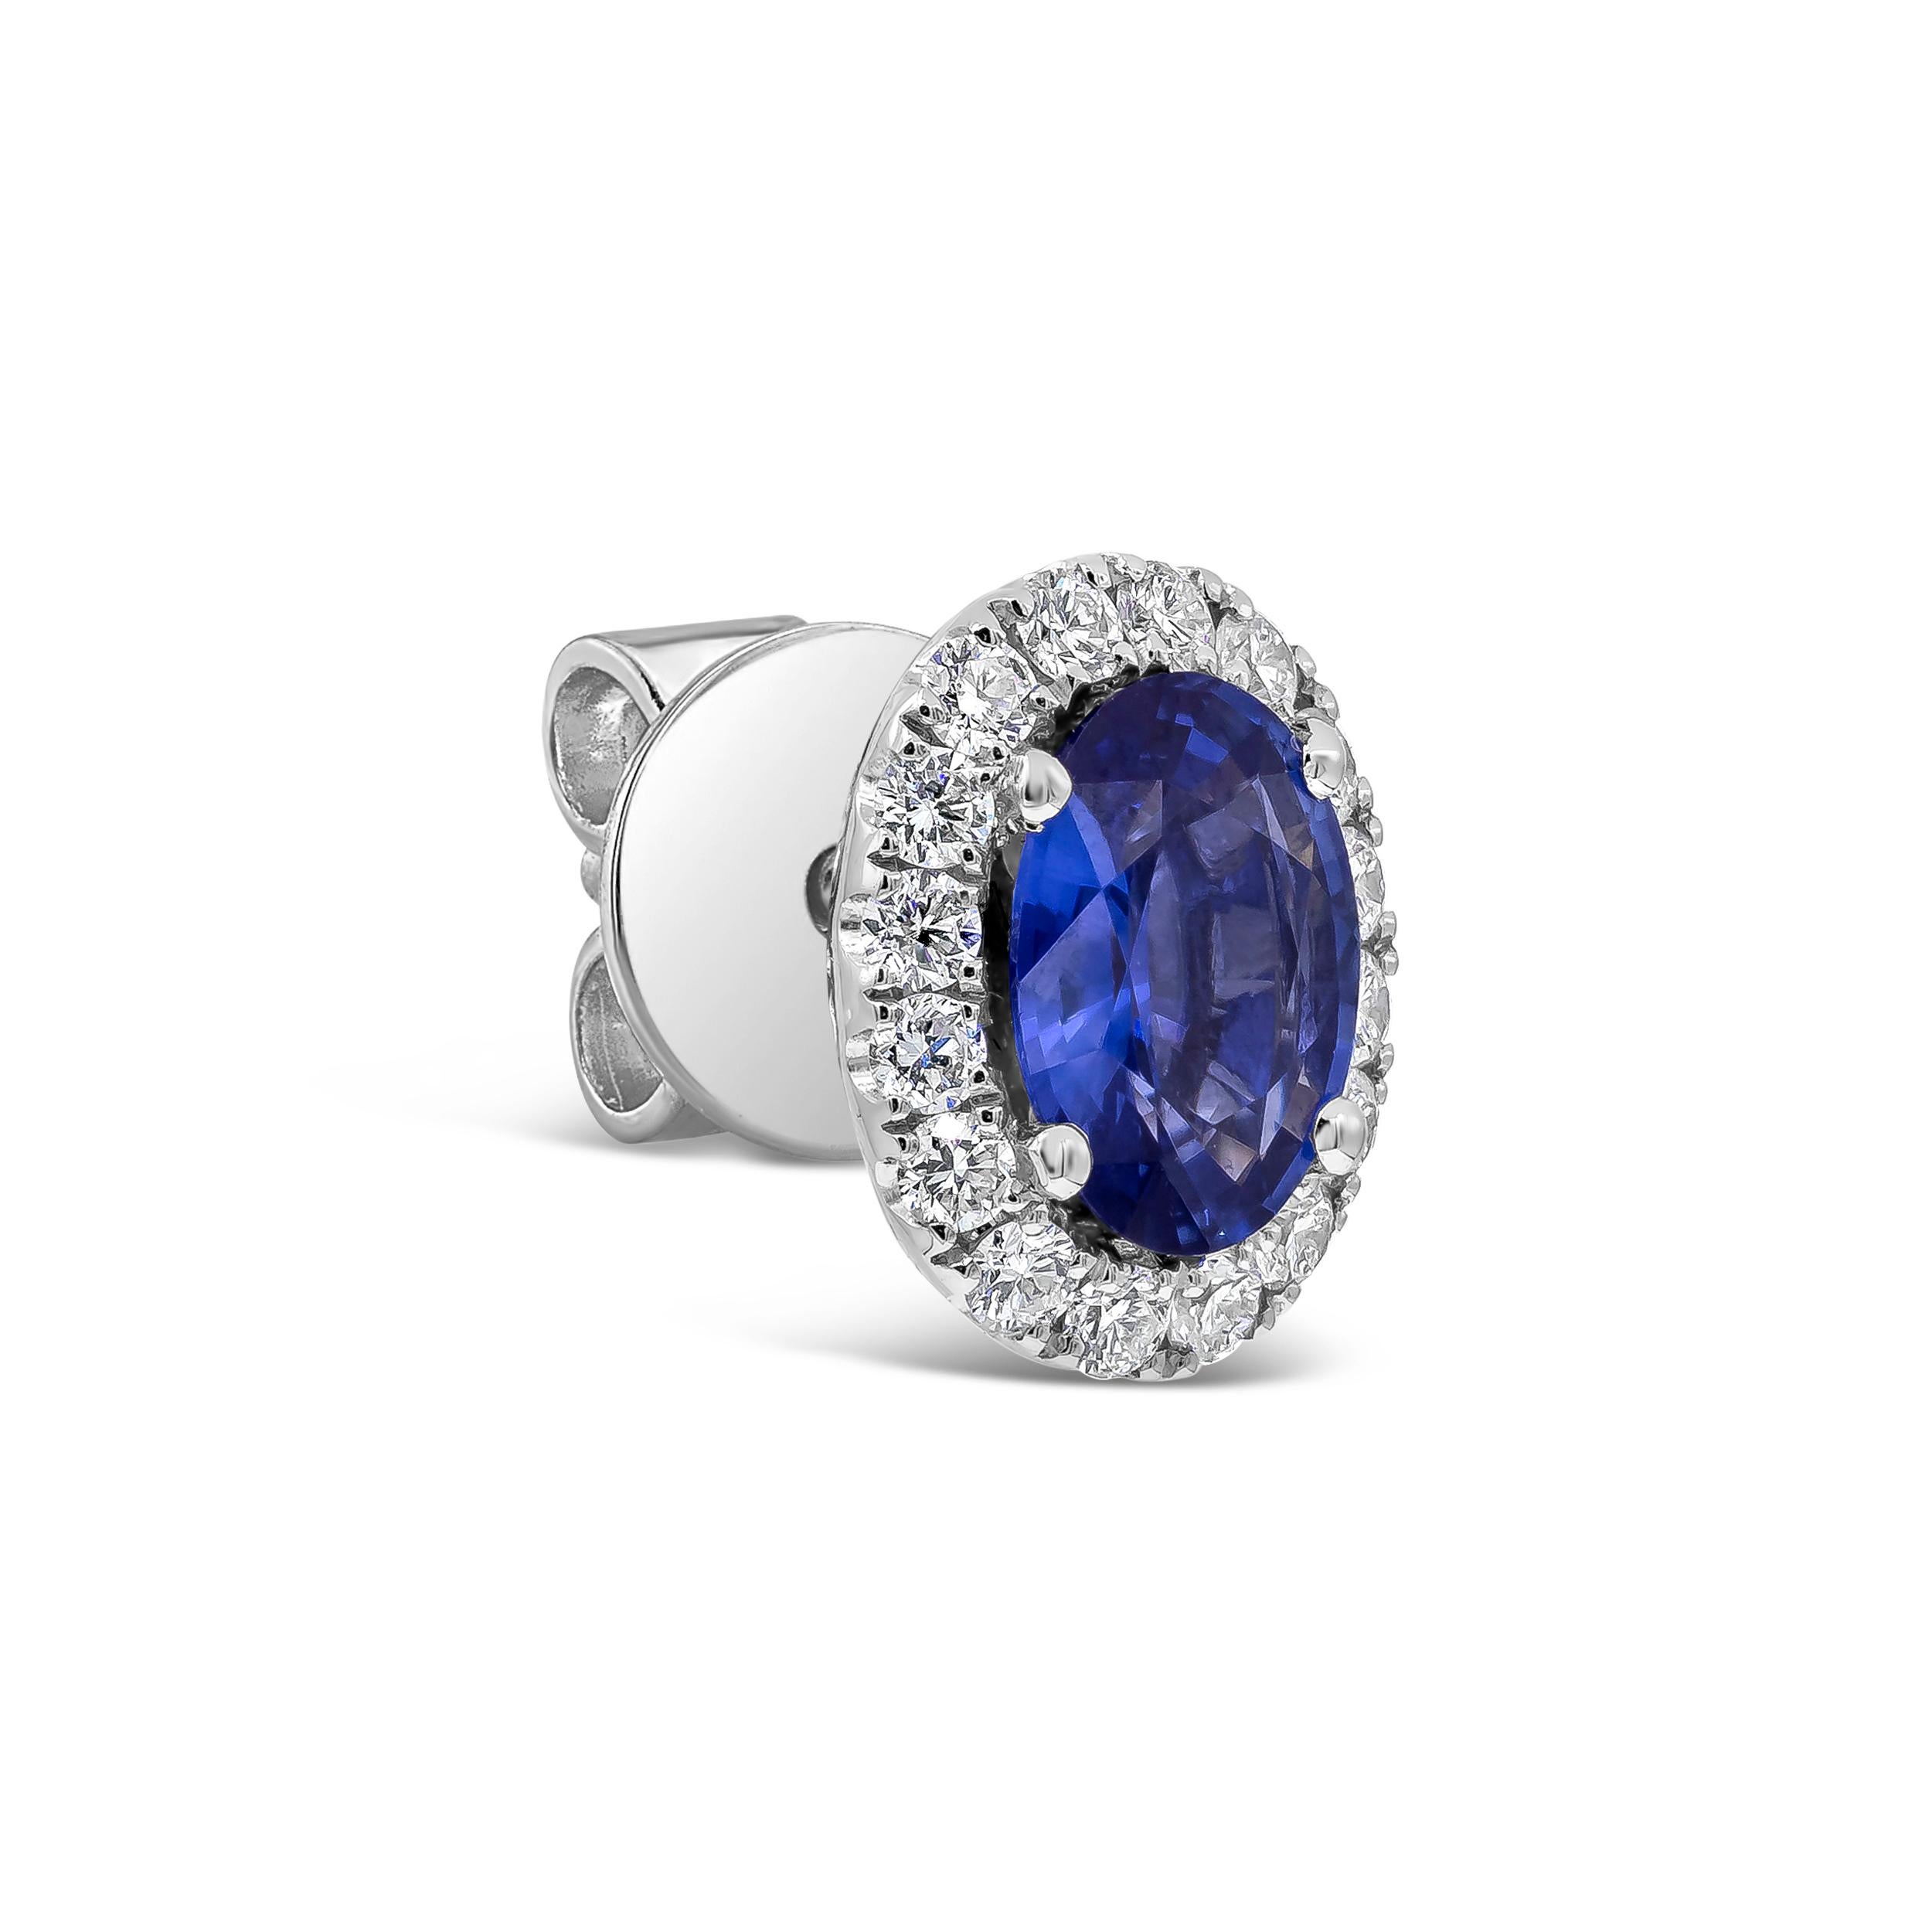 Showcasing two color-rich oval cut blue sapphires weighing 1.64 carats total, surrounded by a single row of round brilliant diamonds. Accent diamonds weigh 0.40 carats total. Made in 18K White Gold

Style available in different price ranges. Prices